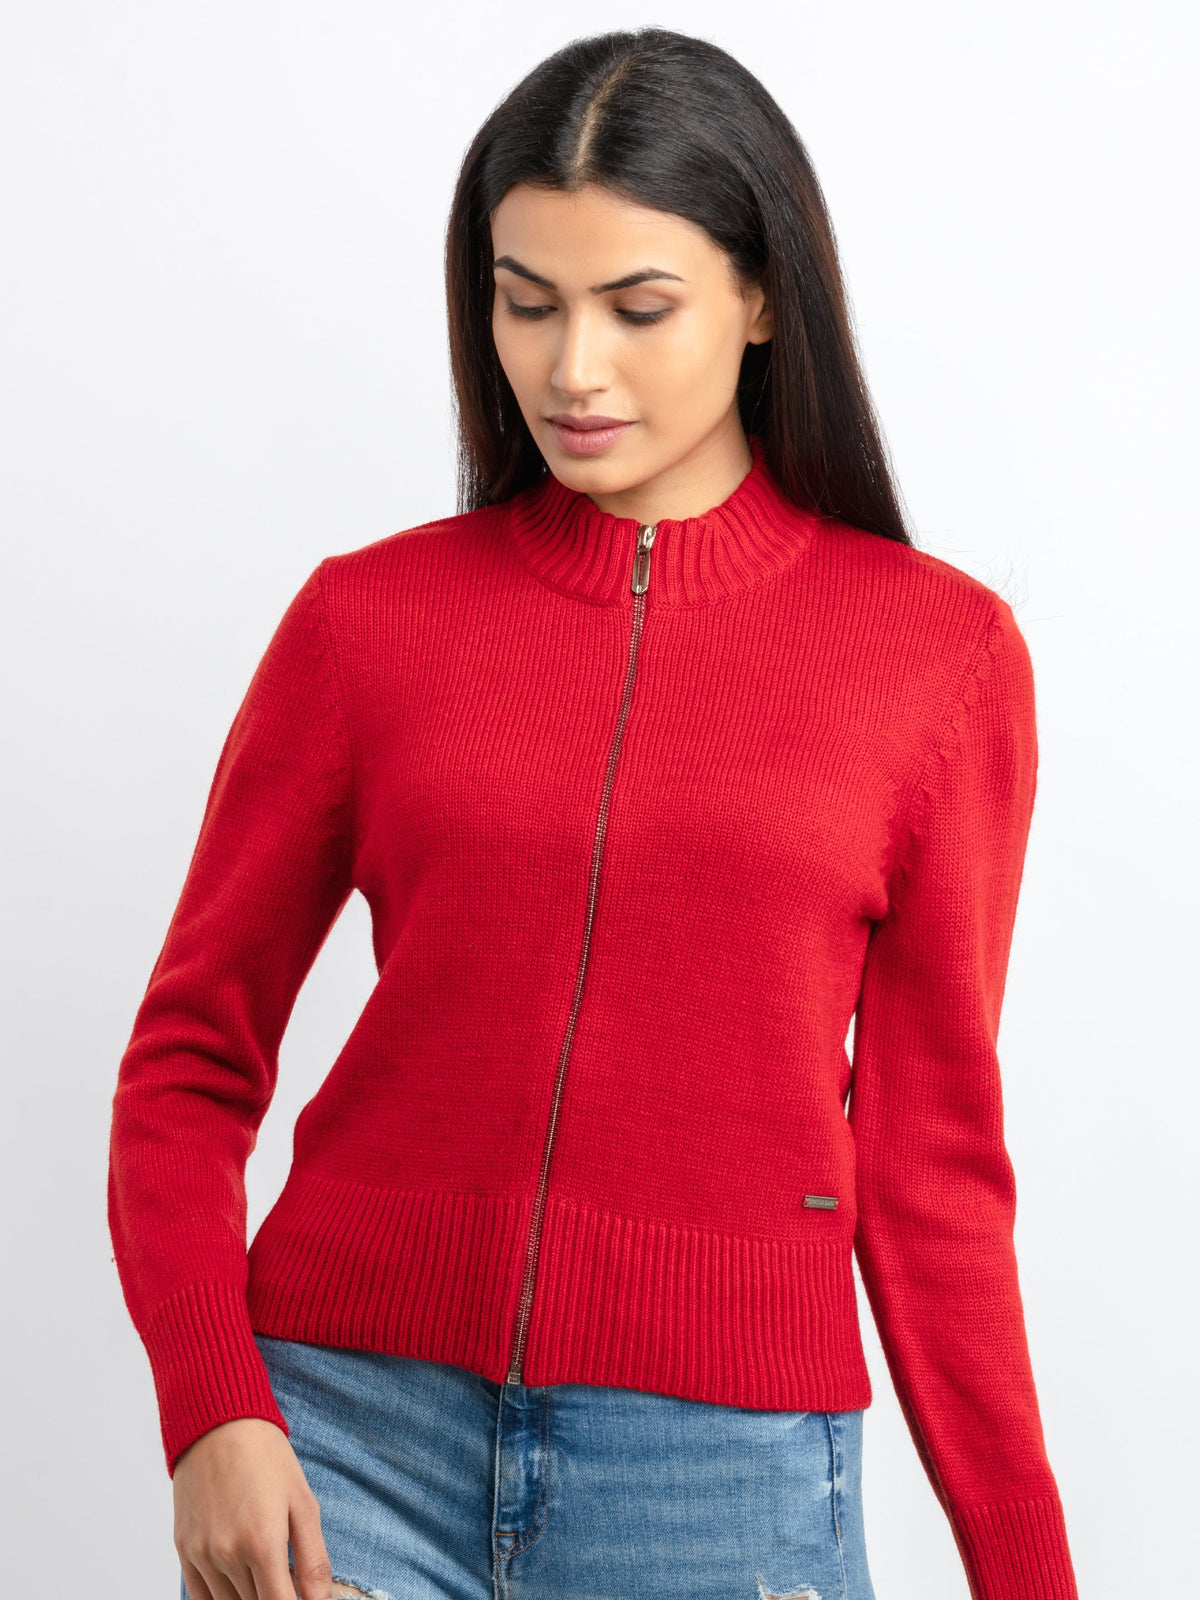 high neck sweater for women